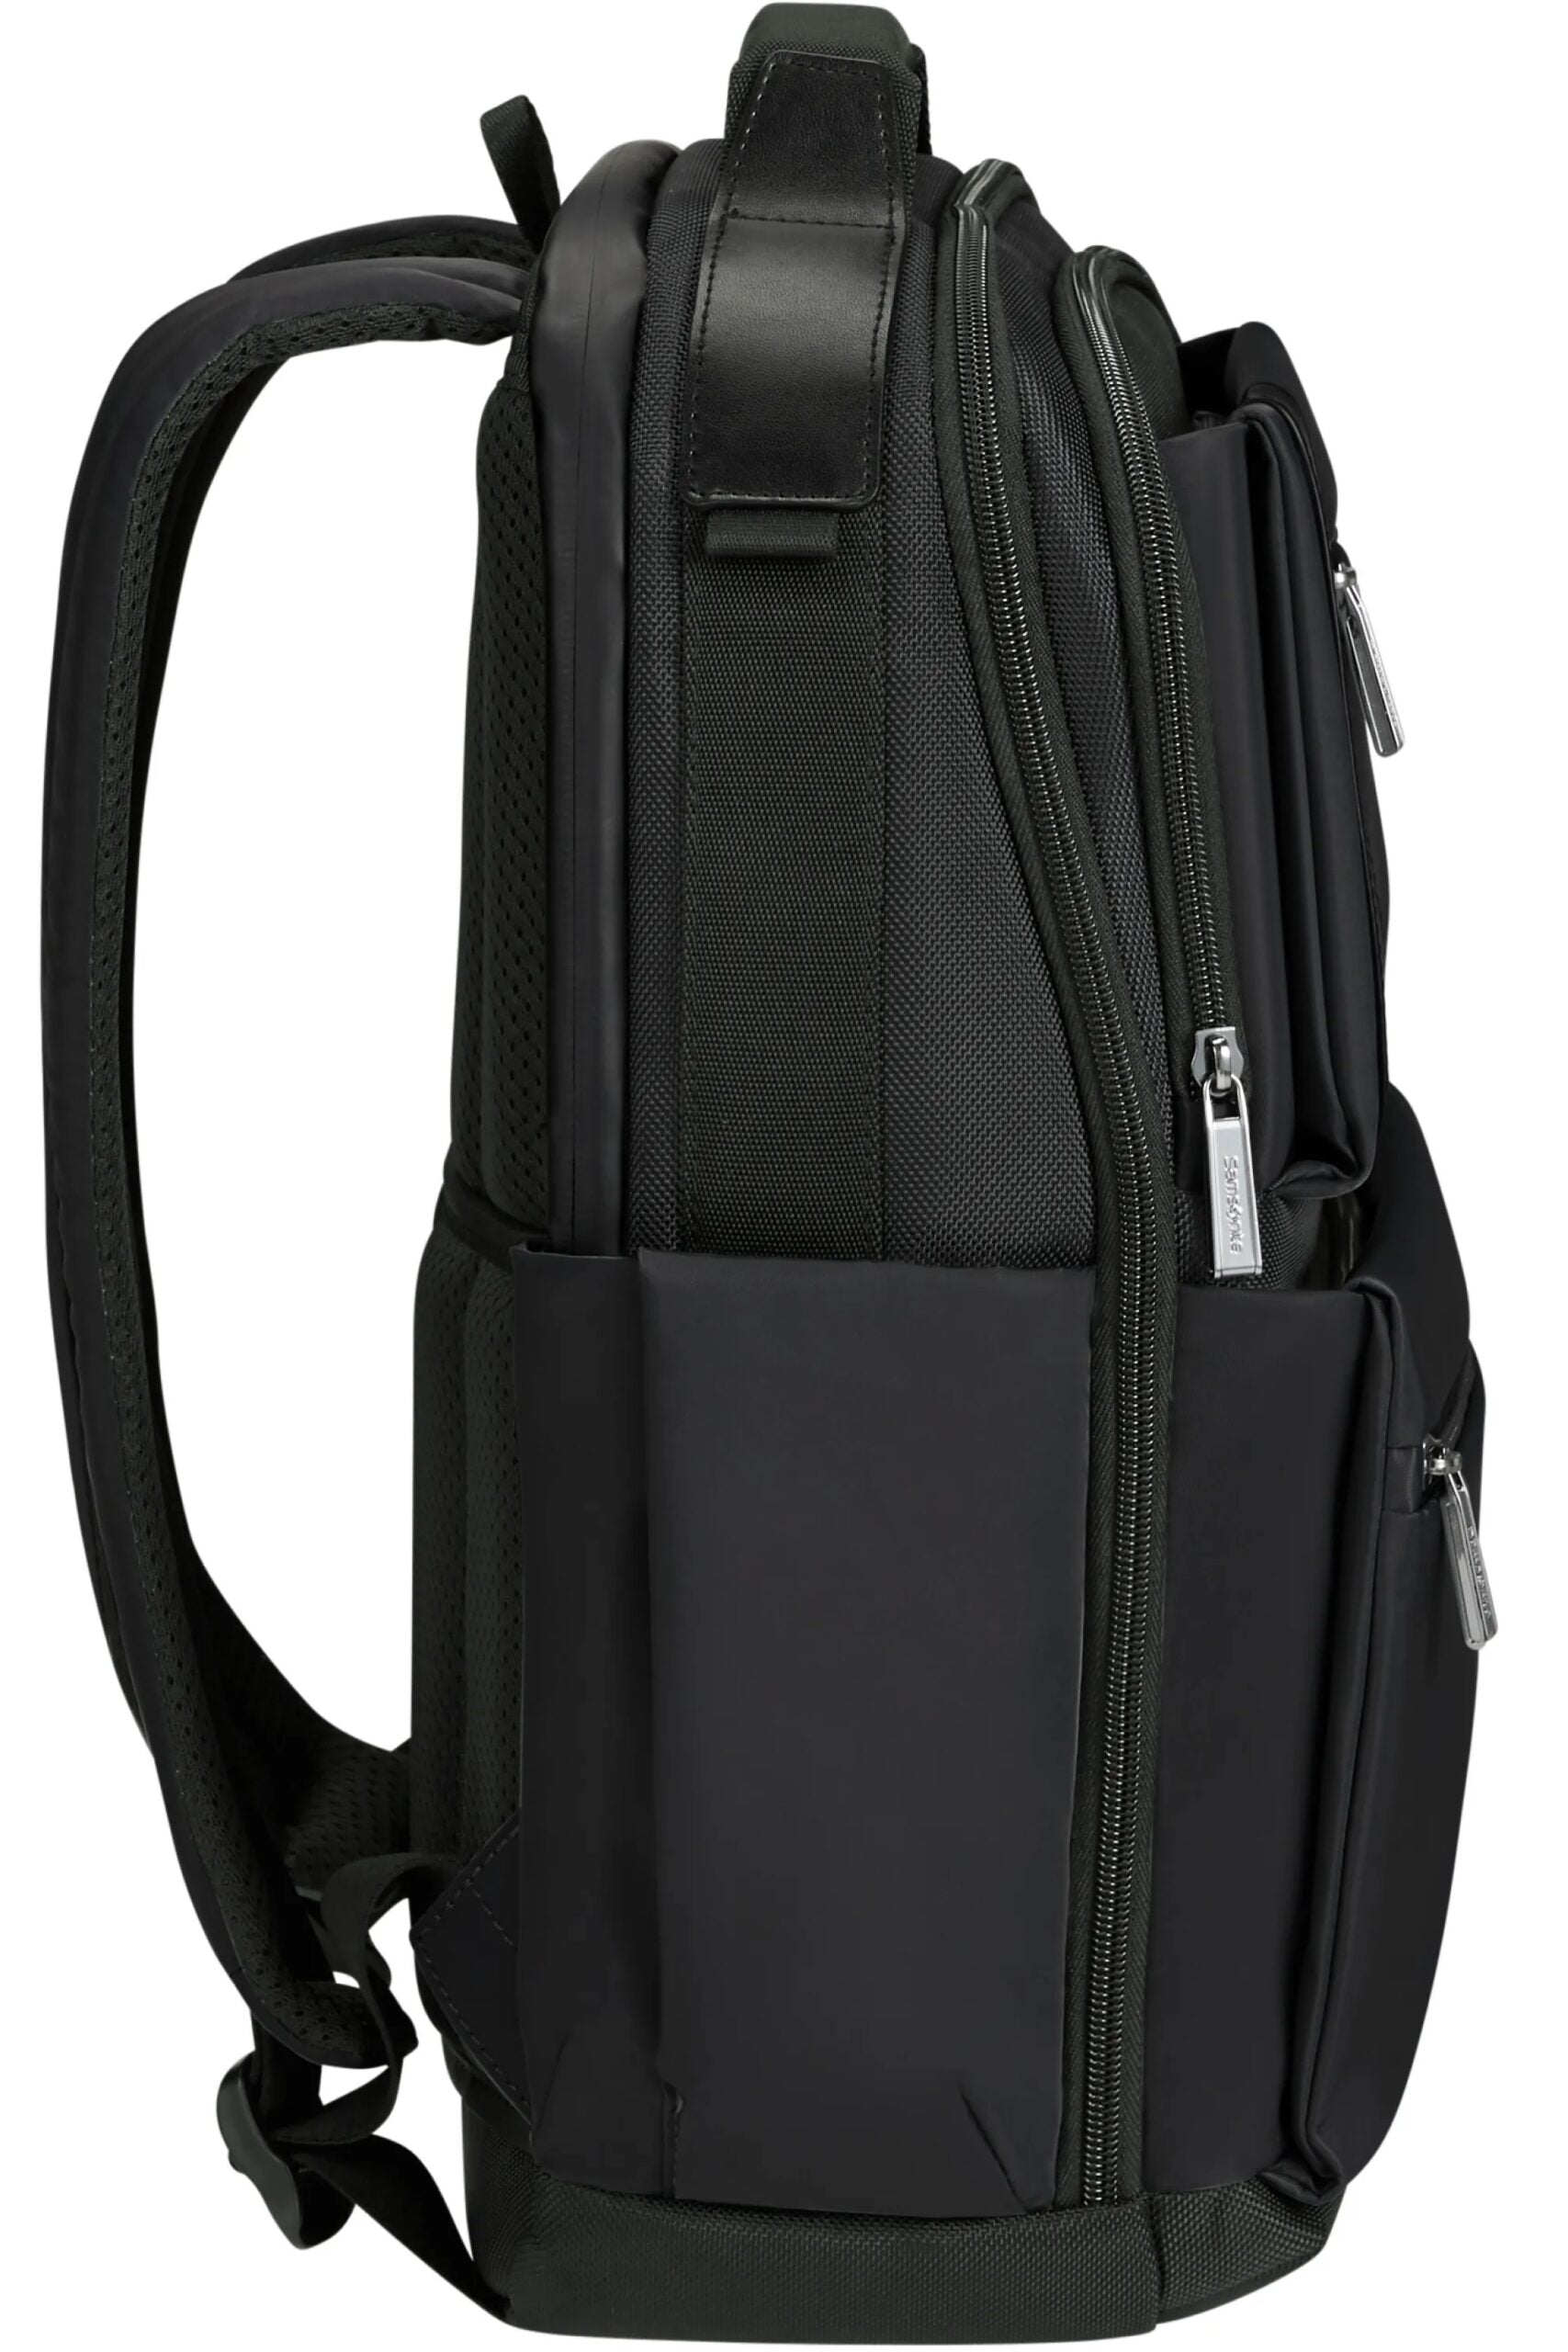 Openroad backpack 14.1 3